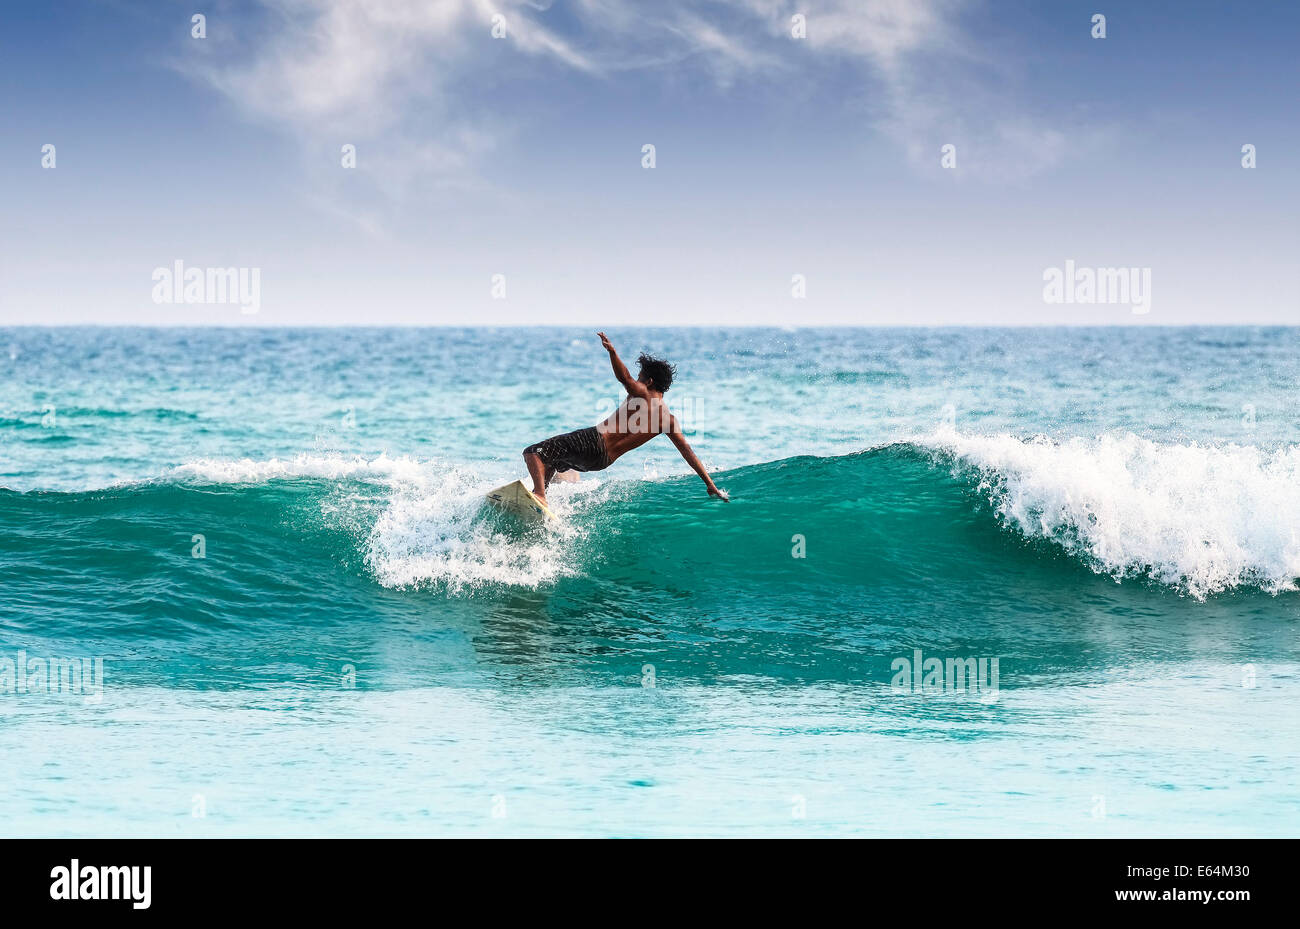 Silhouette of a surfer on waves on famous beach in Sri Lanka. Stock Photo